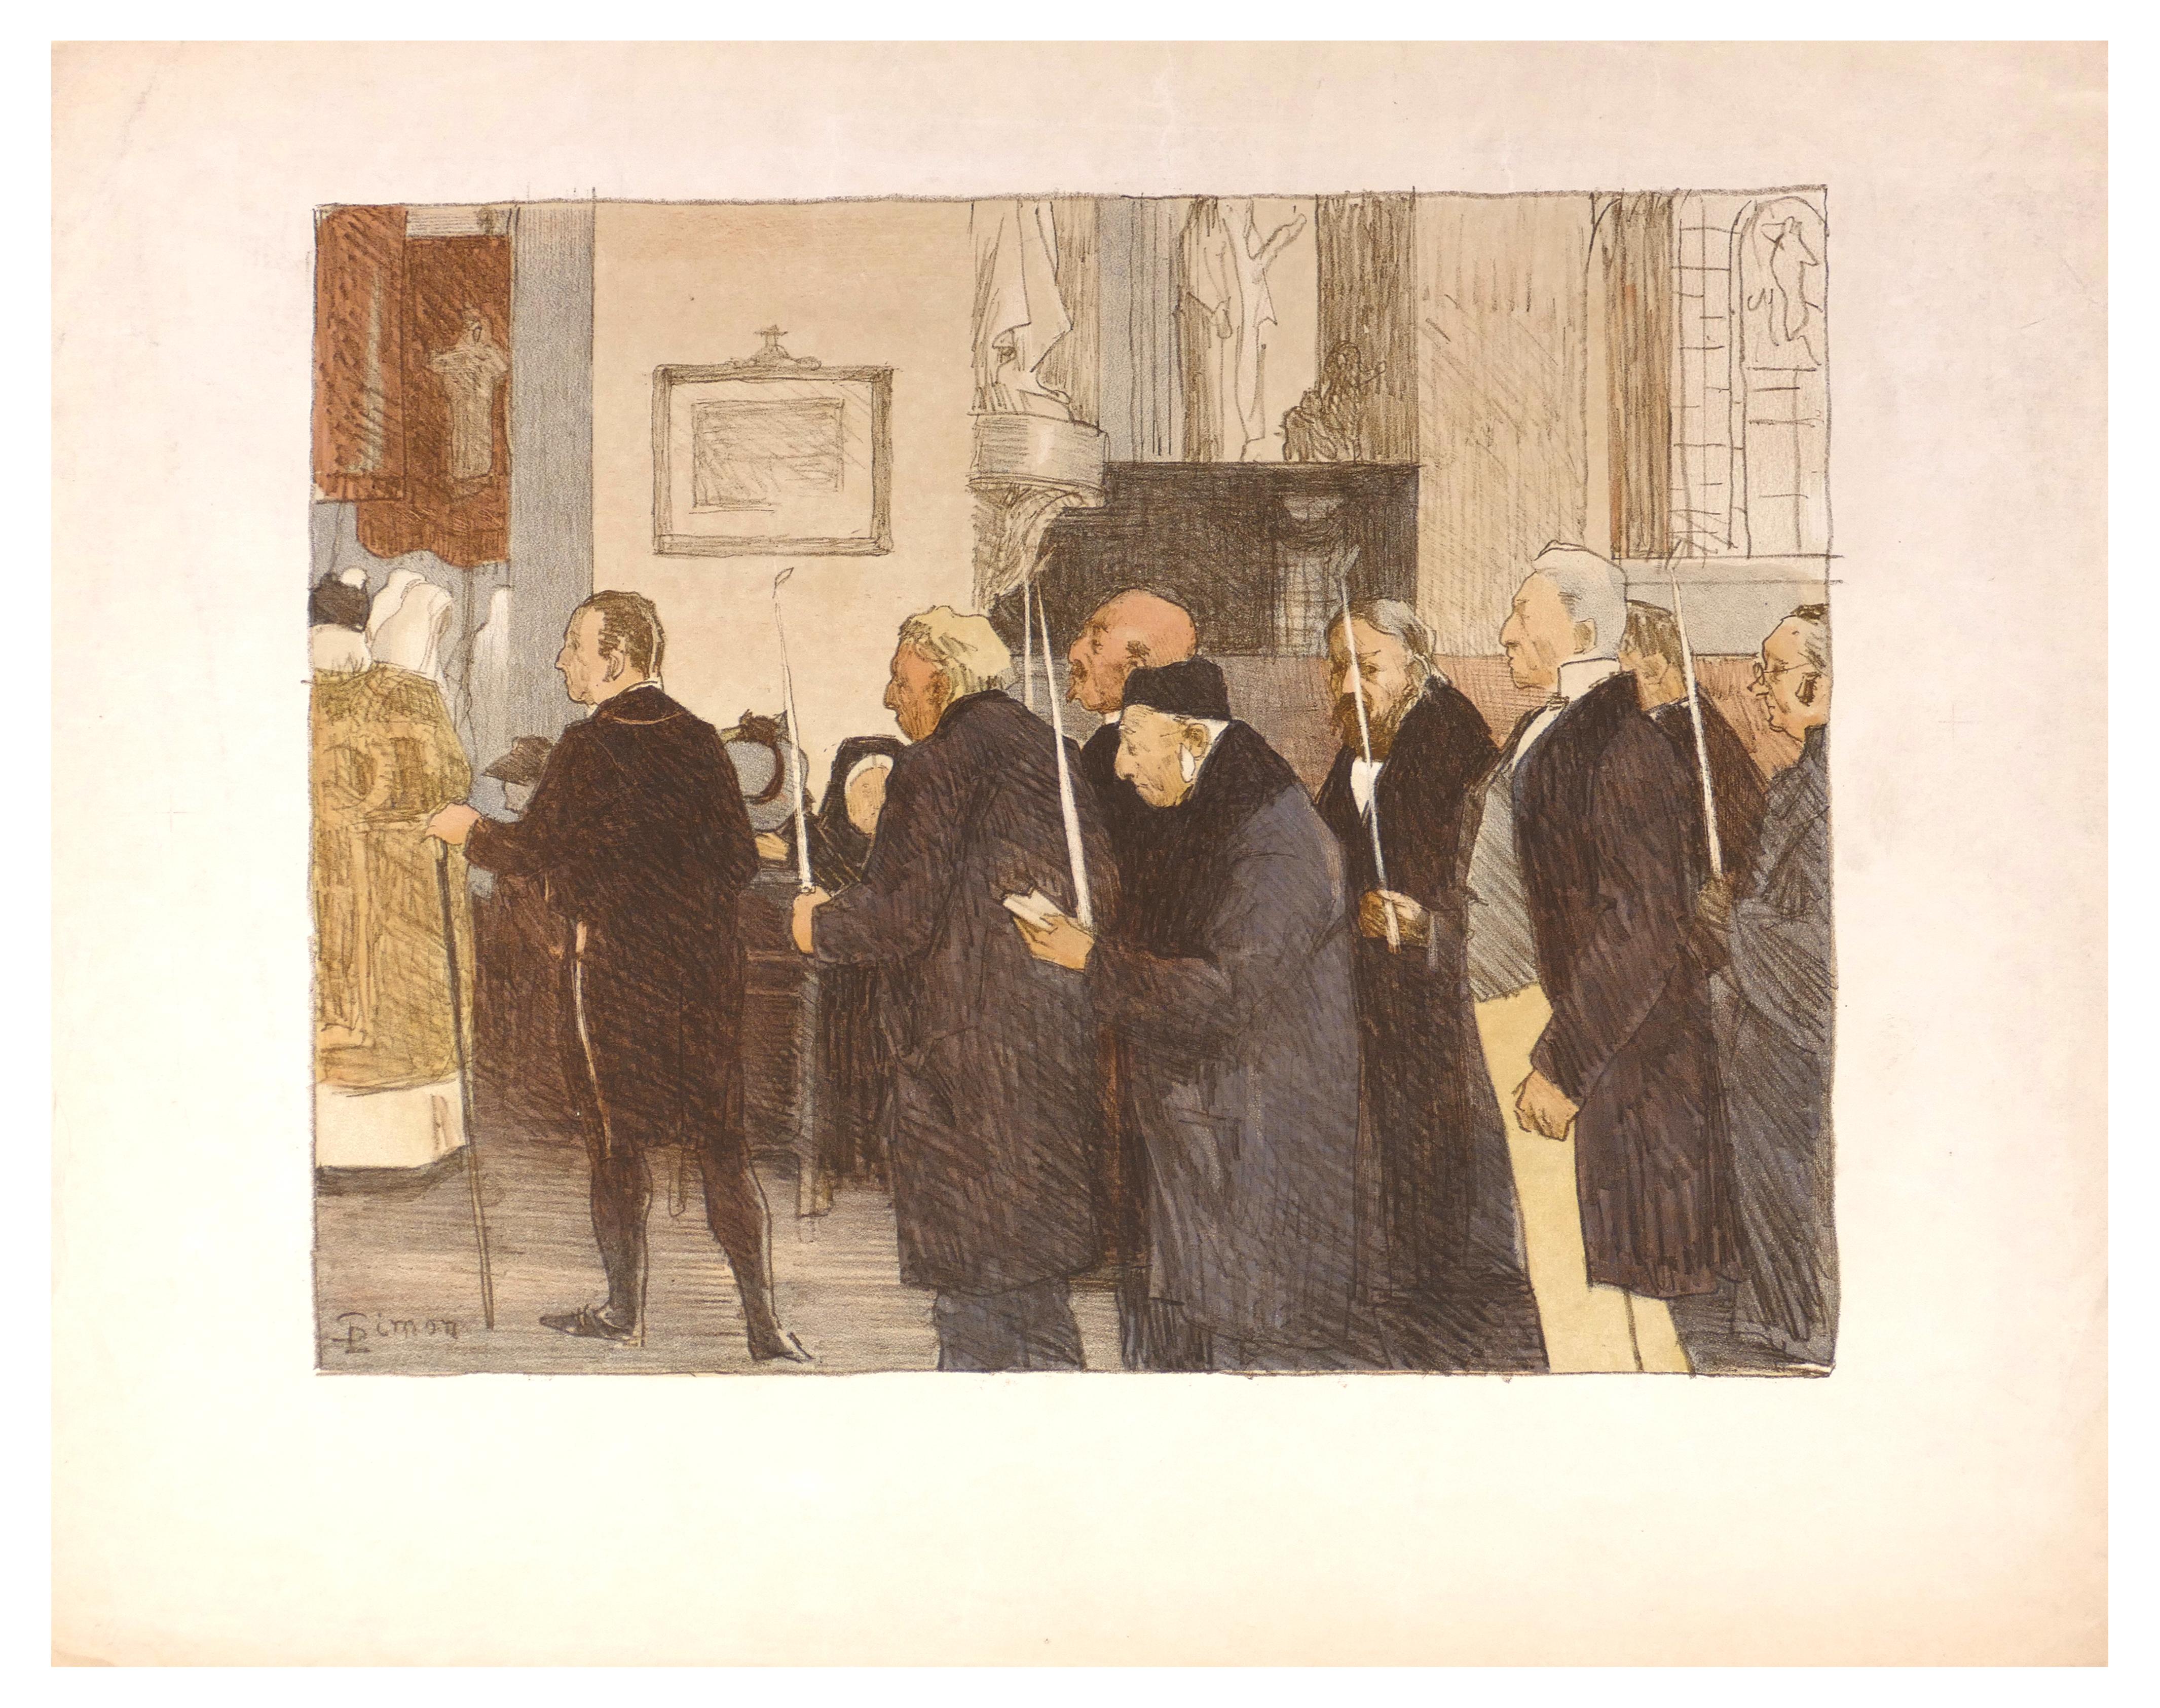 Les Marguillers - Original Lithograph by L- J. Simon in the Early 20th Century - Print by Lucien Joseph Simon